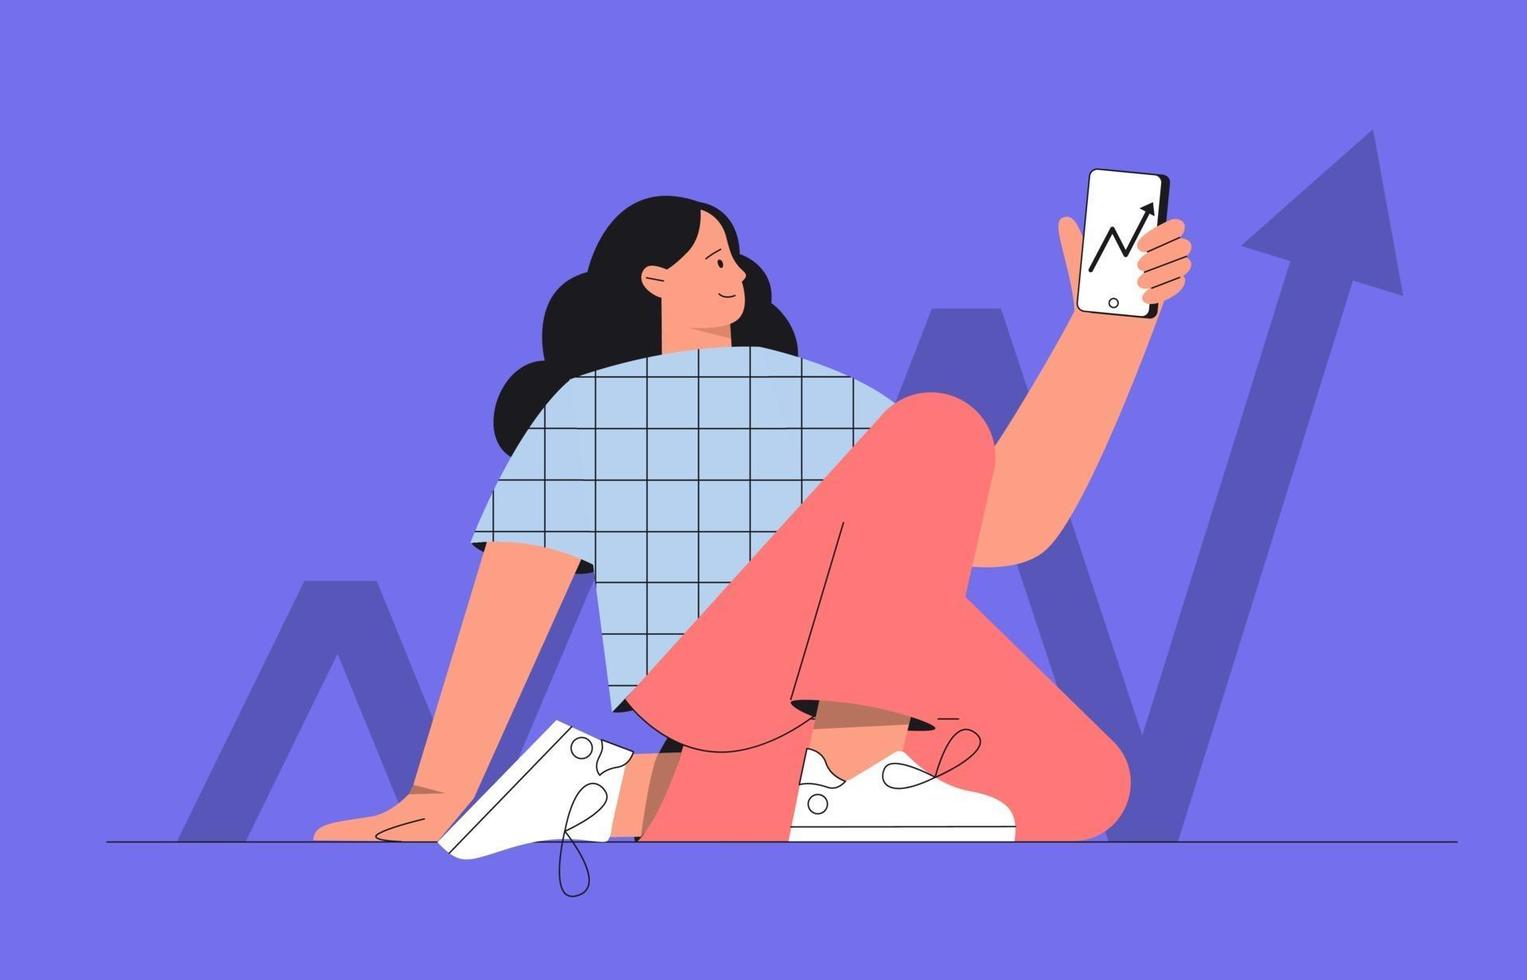 Online investment with mobile phone concept. Investment, stock trading app isolated metaphor. Analytical service and business promotion concept. Young woman holds a phone, flat vector illustration.